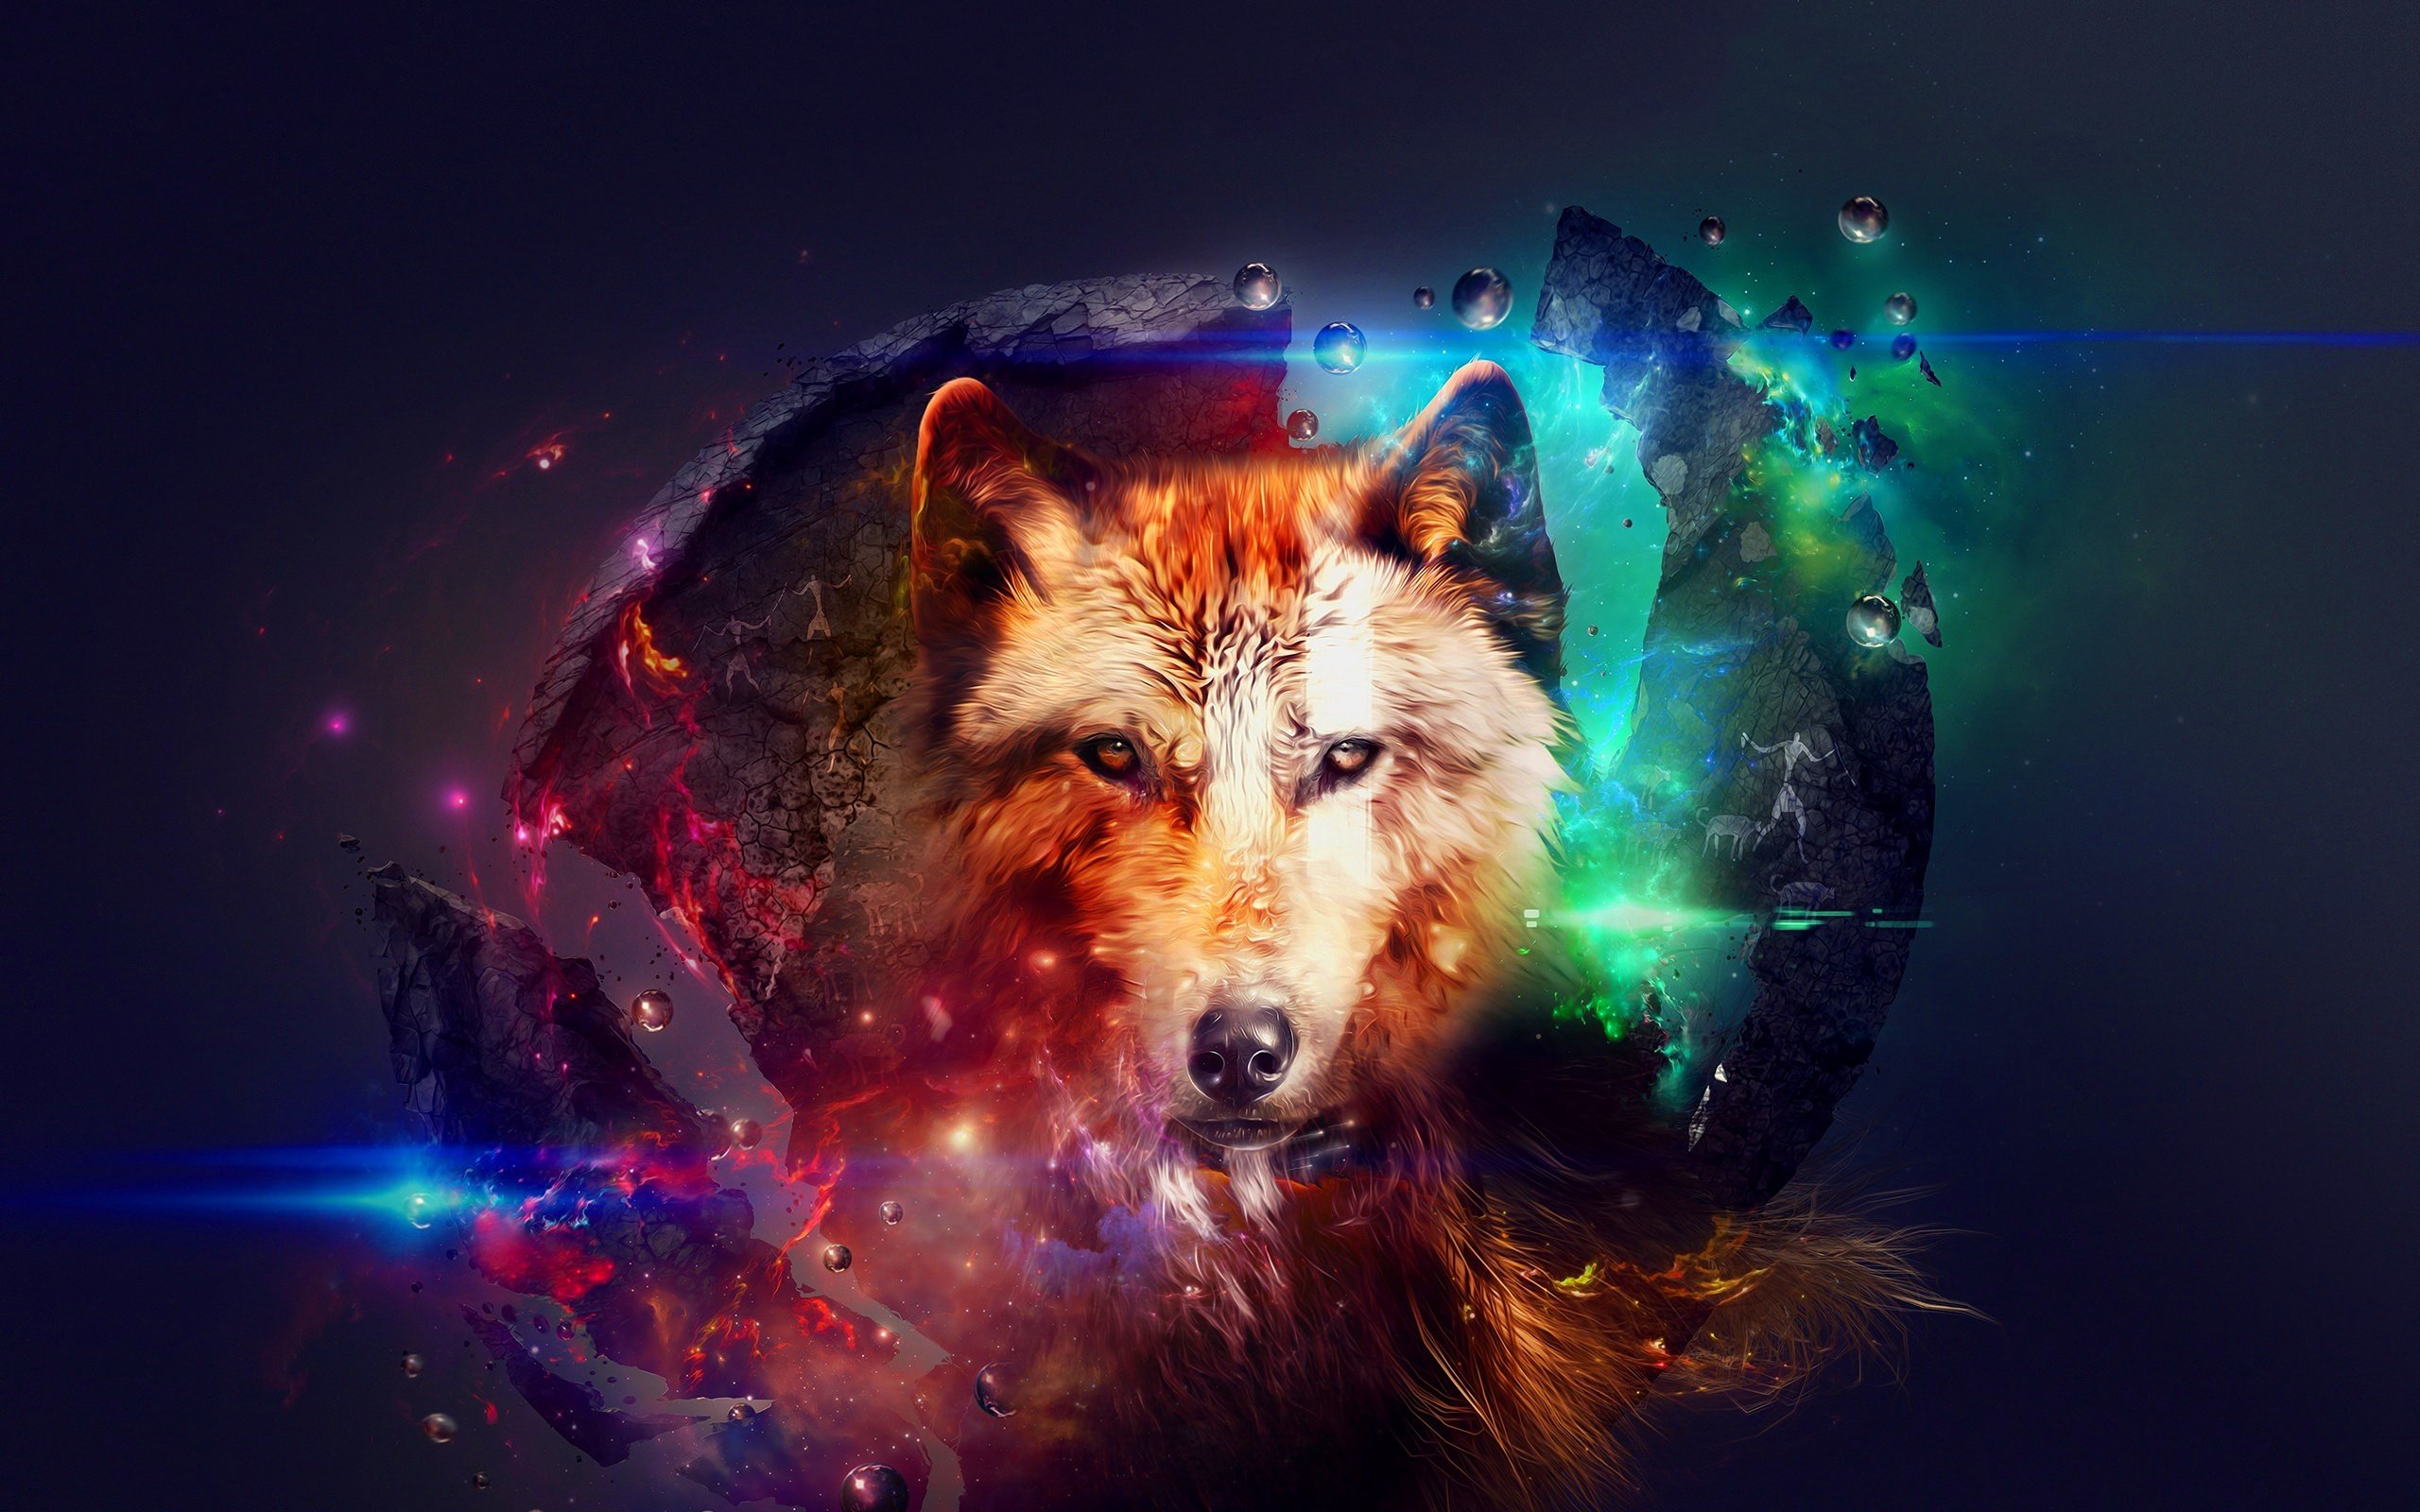  Wolf Art Photos Images Pics Pictures Wallpapers image and save